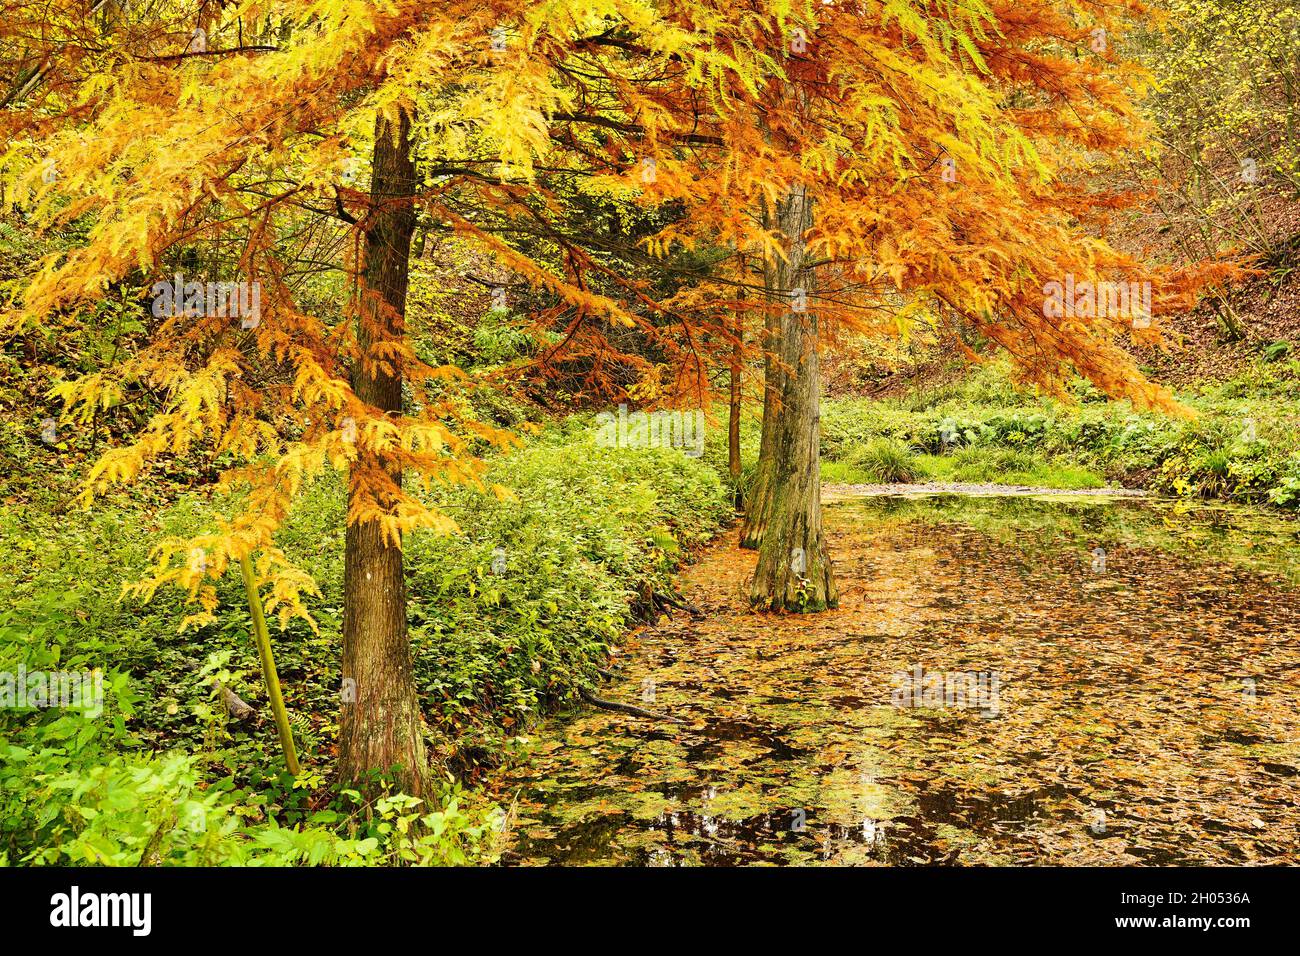 Swamp cypresses (Taxodium distichum) in autumn colors in a pond. Exotic forest in Weinheim, Baden-Wurttemberg, Germany. Stock Photo